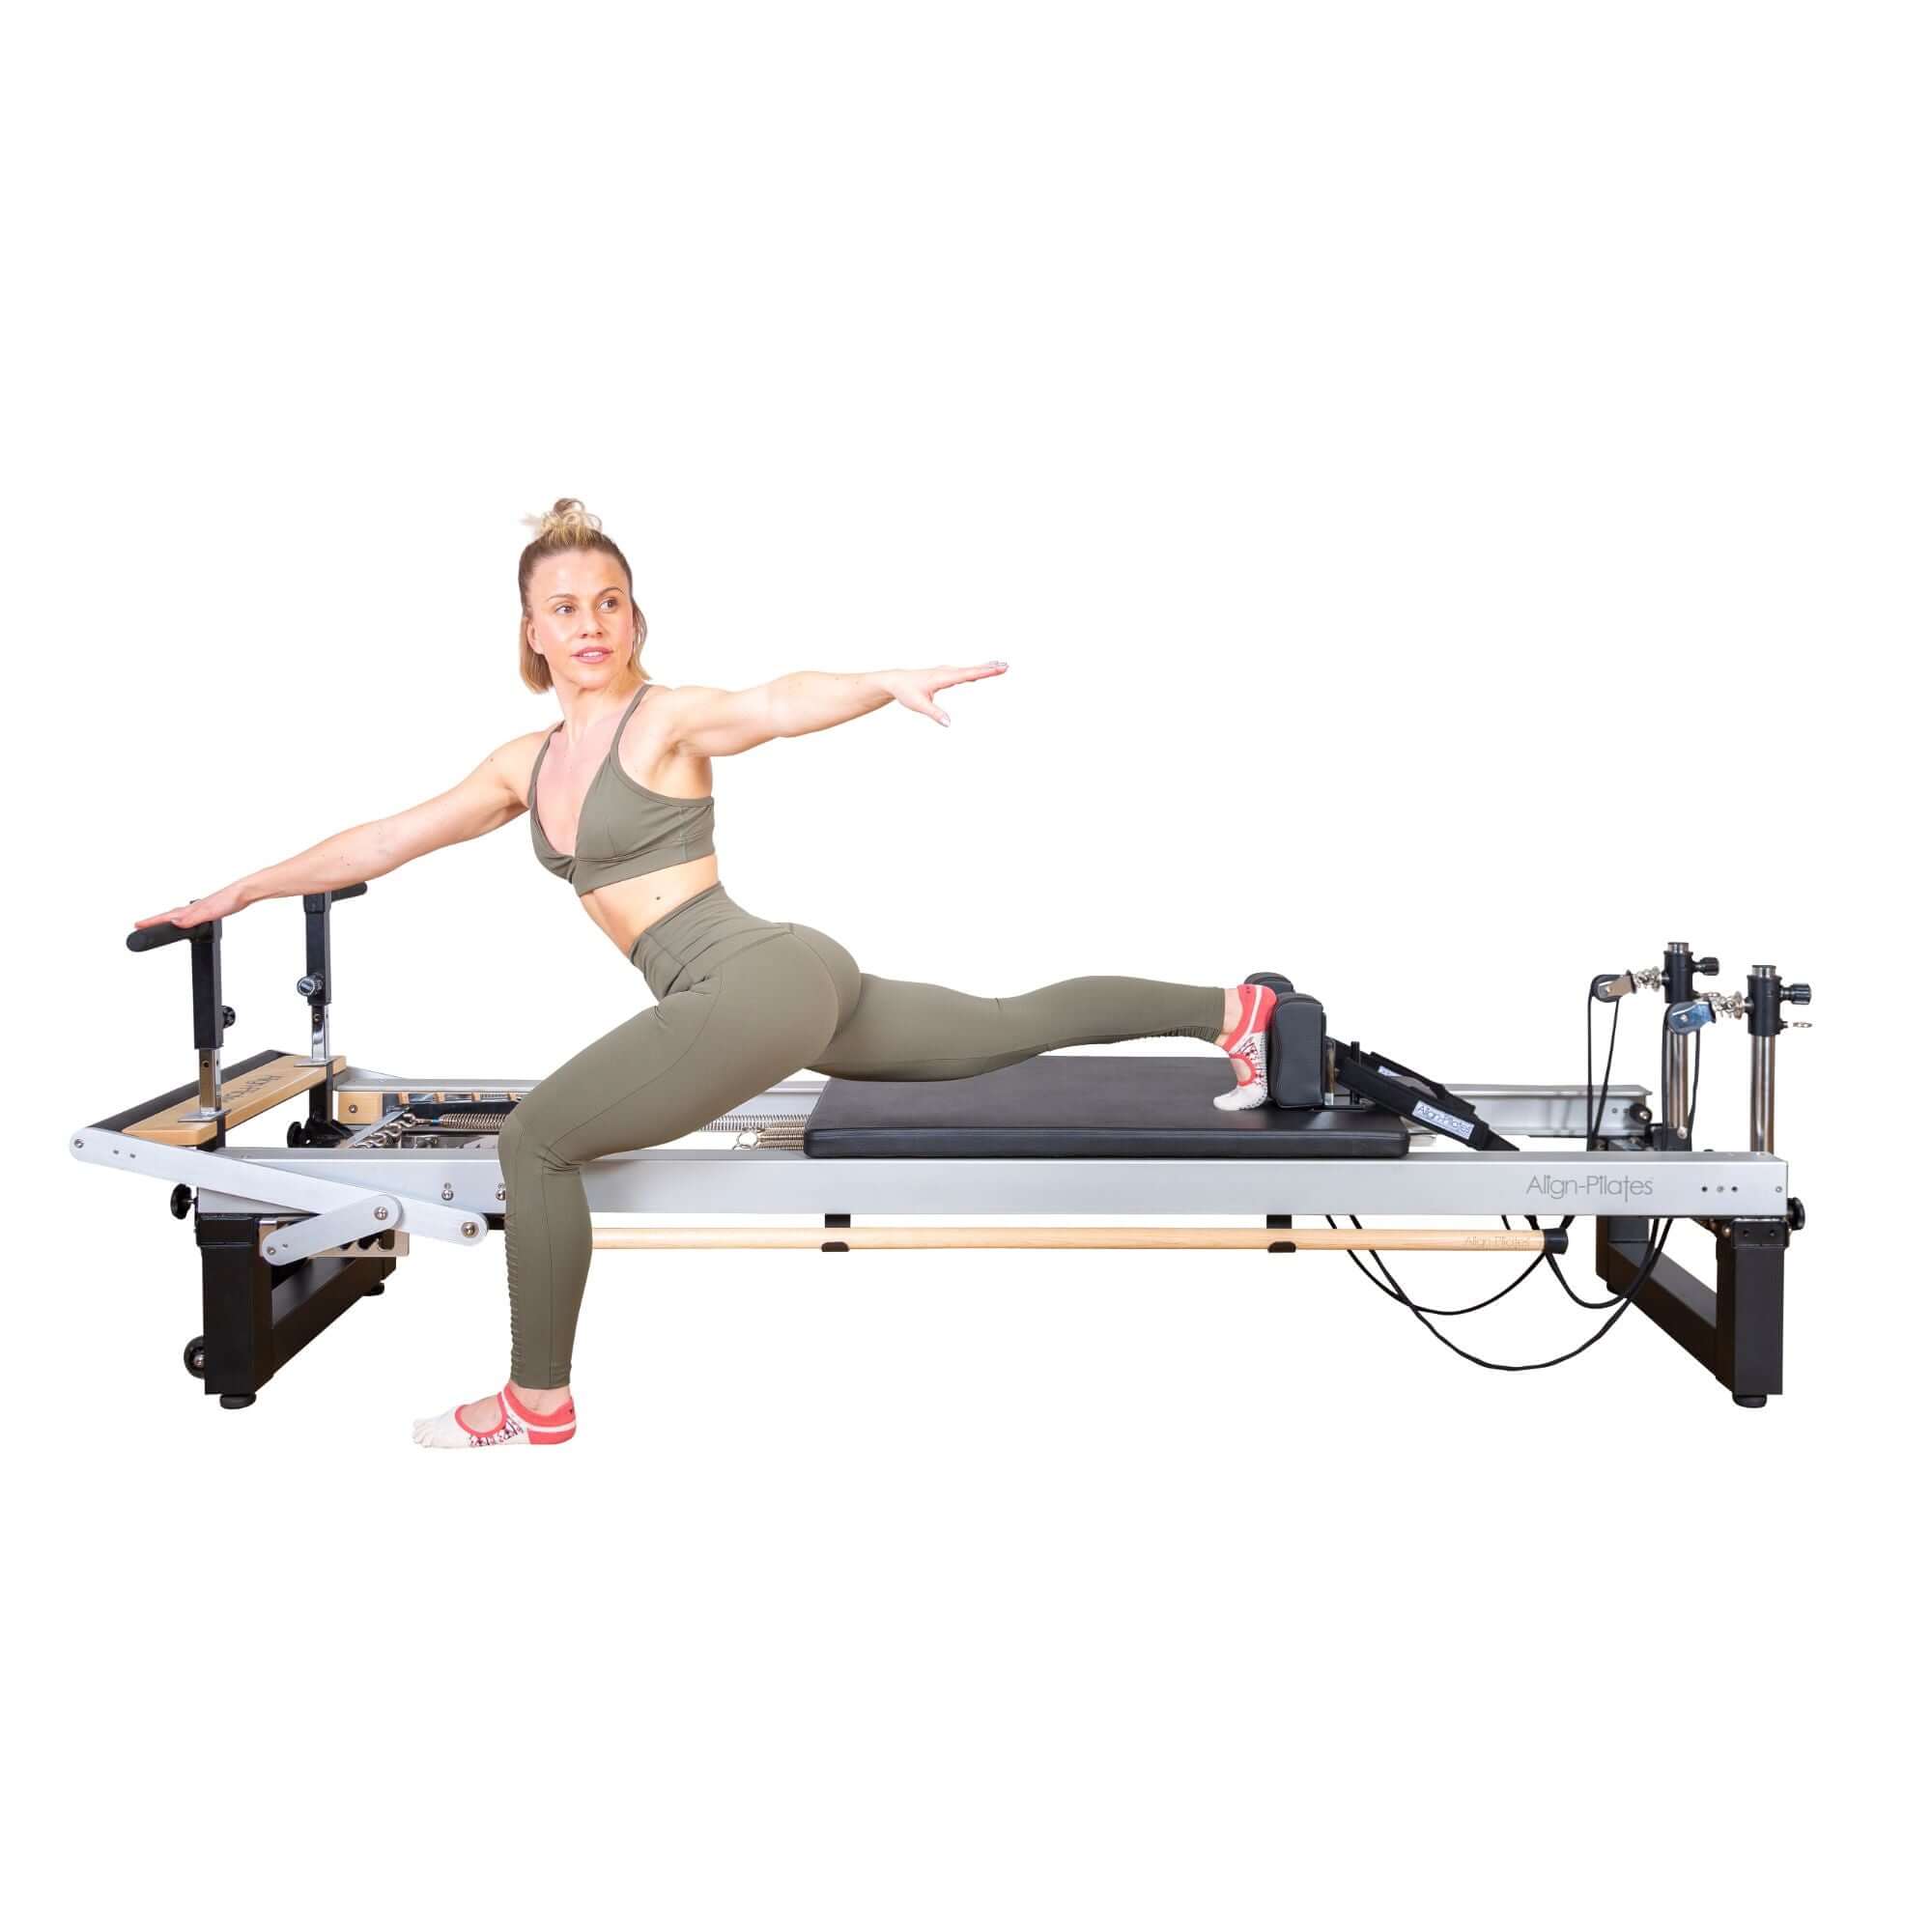 Align Pilates A8 Pro Reformer with adjustable resistance settings, suitable for various fitness levels.